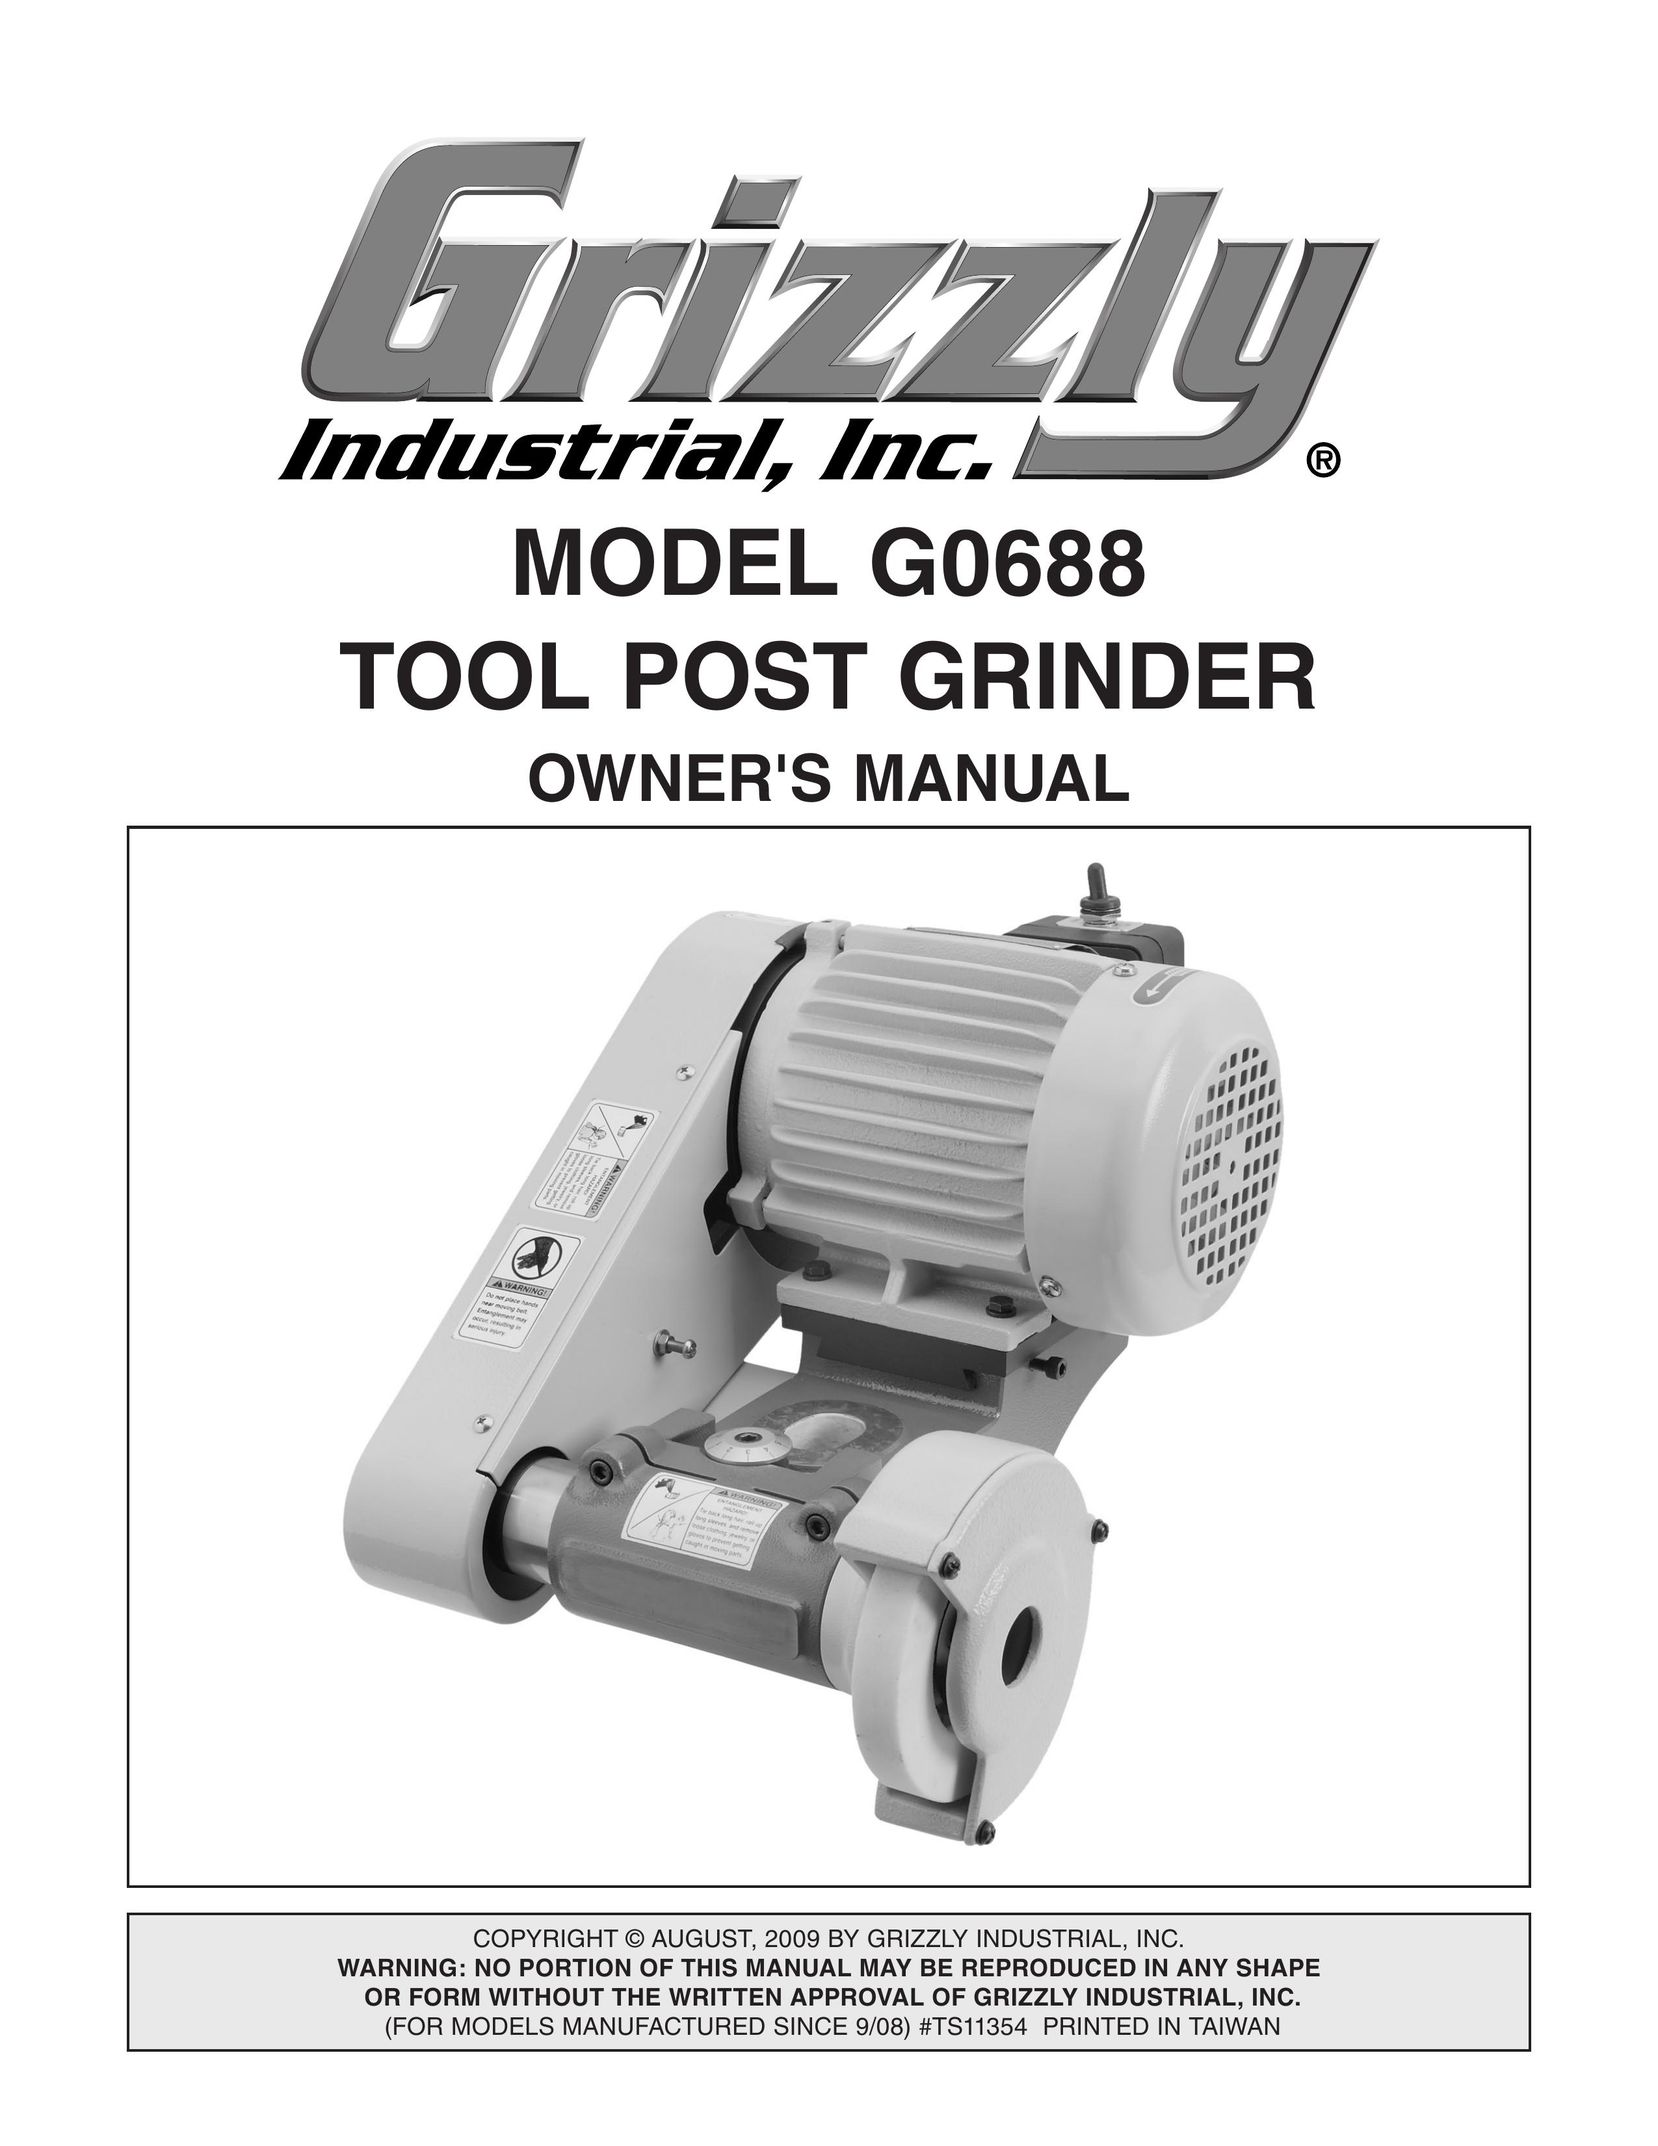 Grizzly G0688 Grinder User Manual